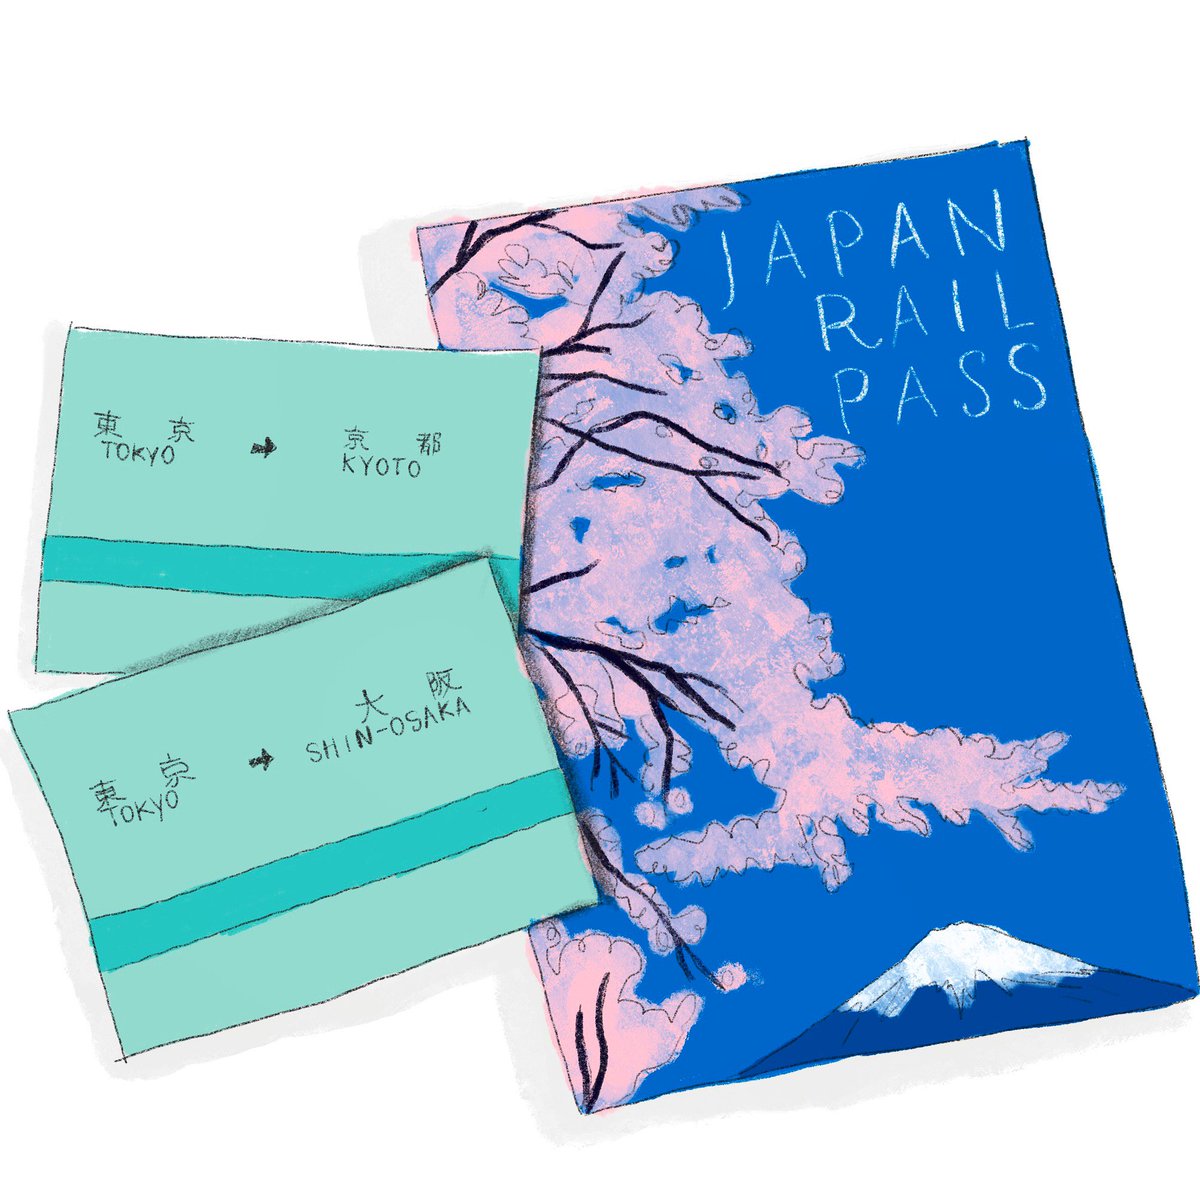 #JAPANRAILPASS 

Discover how to find, buy and use the #JRPASS for your next trip to Japan.

Scopri come trovare, comprare ed usare il #JRPASS per il tuo prossimo viaggio in Giappone. 

dedepart.com/japan-rail-pass

#dedepart #tokyo #trip #travelling #illustratedguide #tripadvices